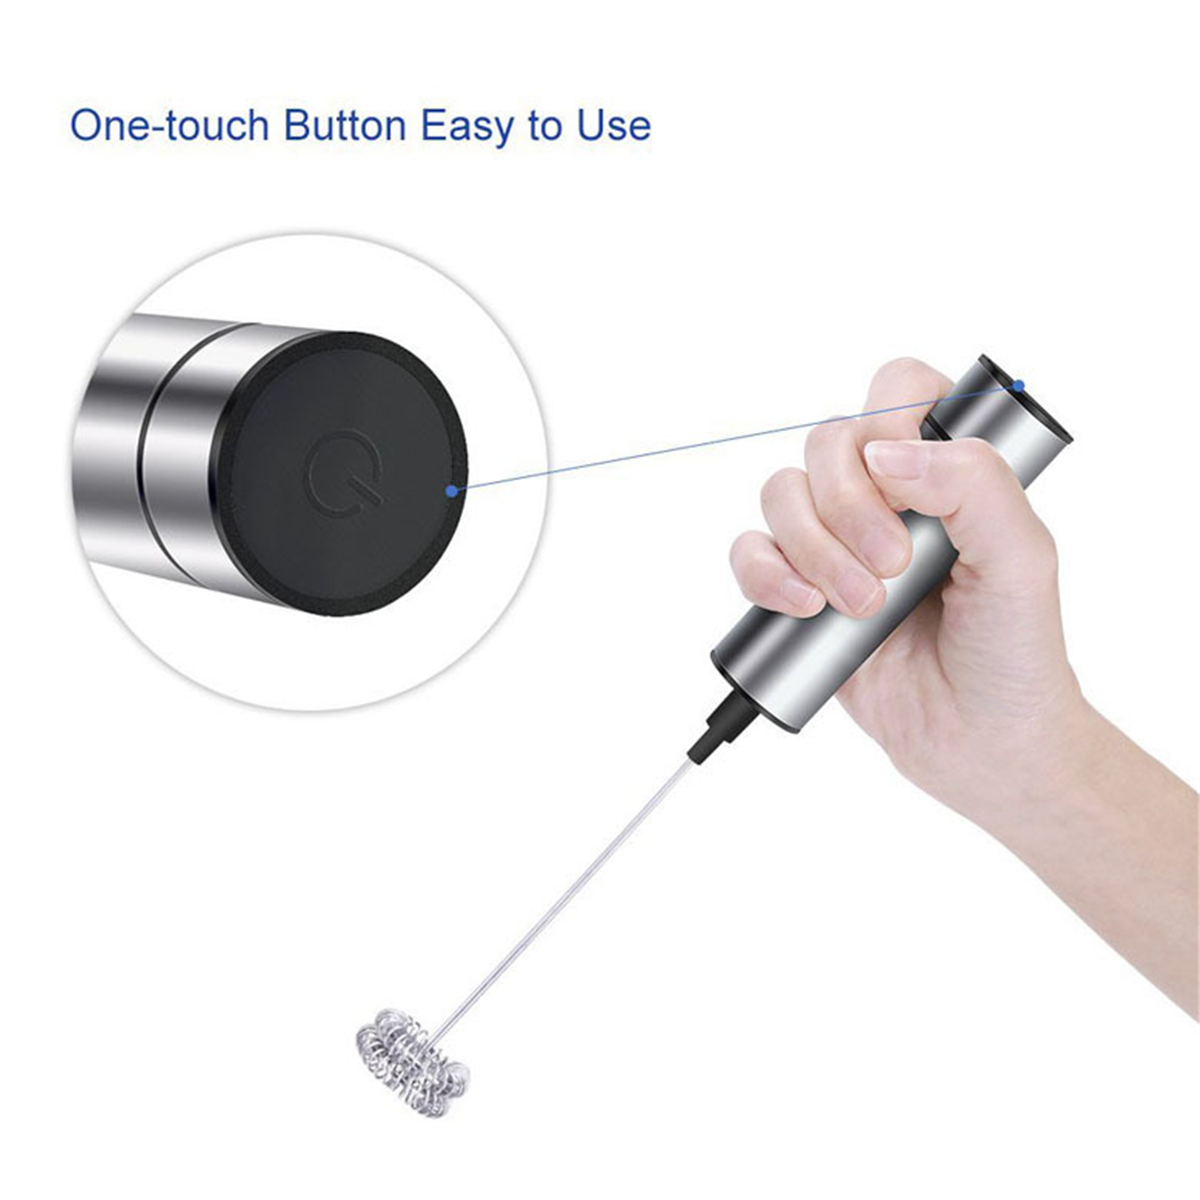 Electric-Handheld-Milk-Frother-Foamer-Mixer-Stainless-Steel-Coffee-Latte-Stirrer-Egg-Beater-1187287